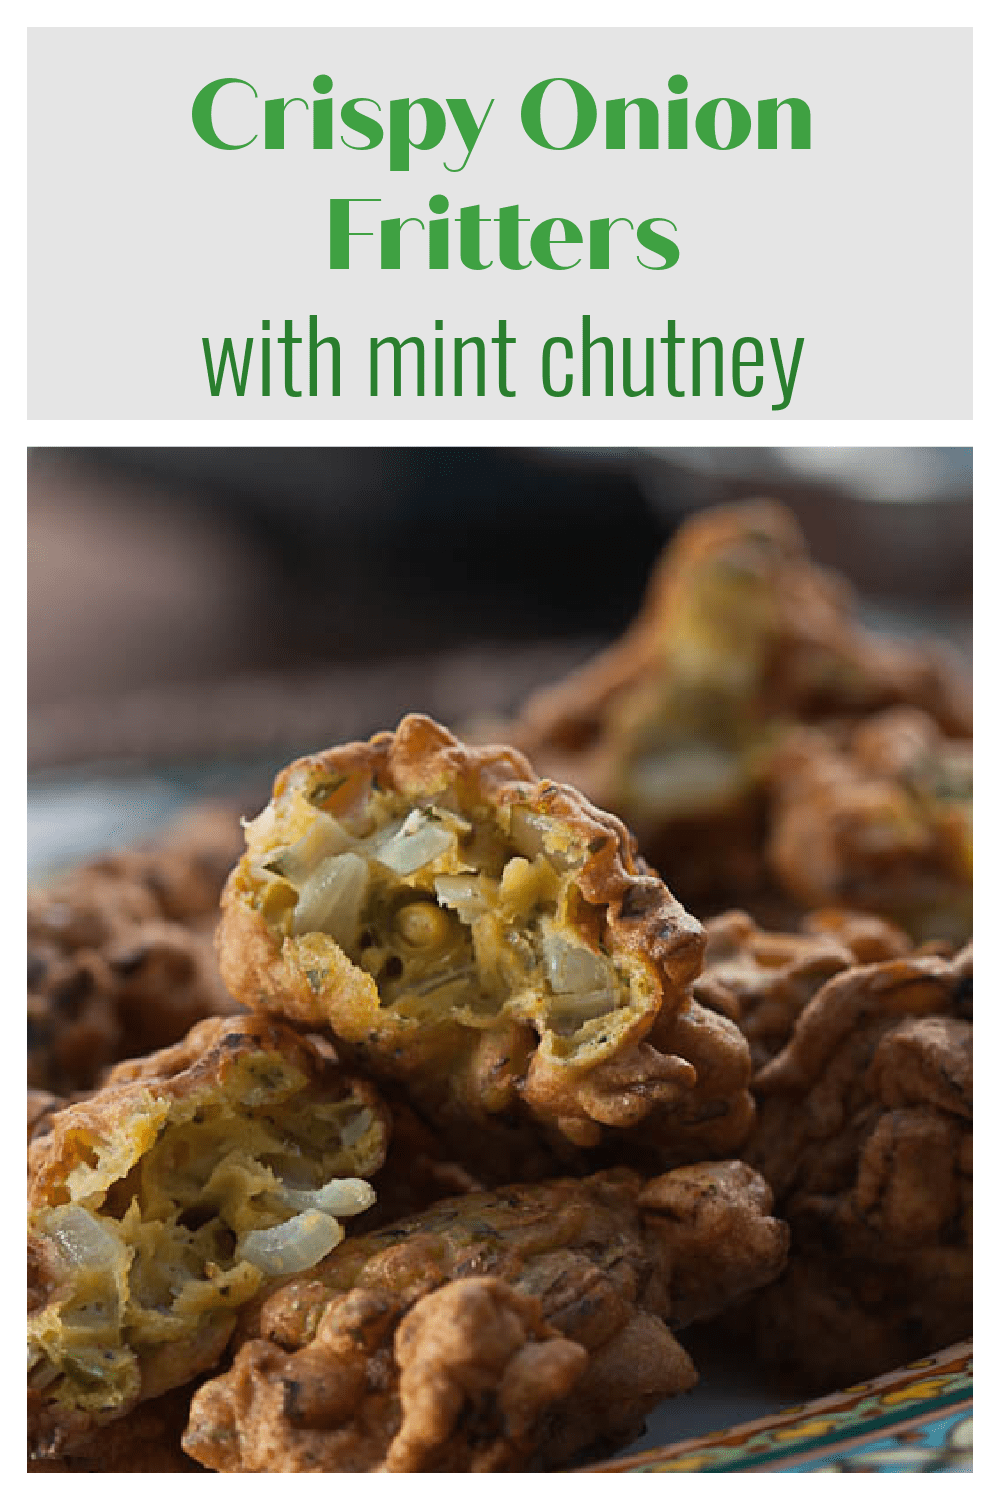 Onion fritters with cilantro mint dipping sauce are a delicious appetizer or snack. Serve with cilantro mint chutney.